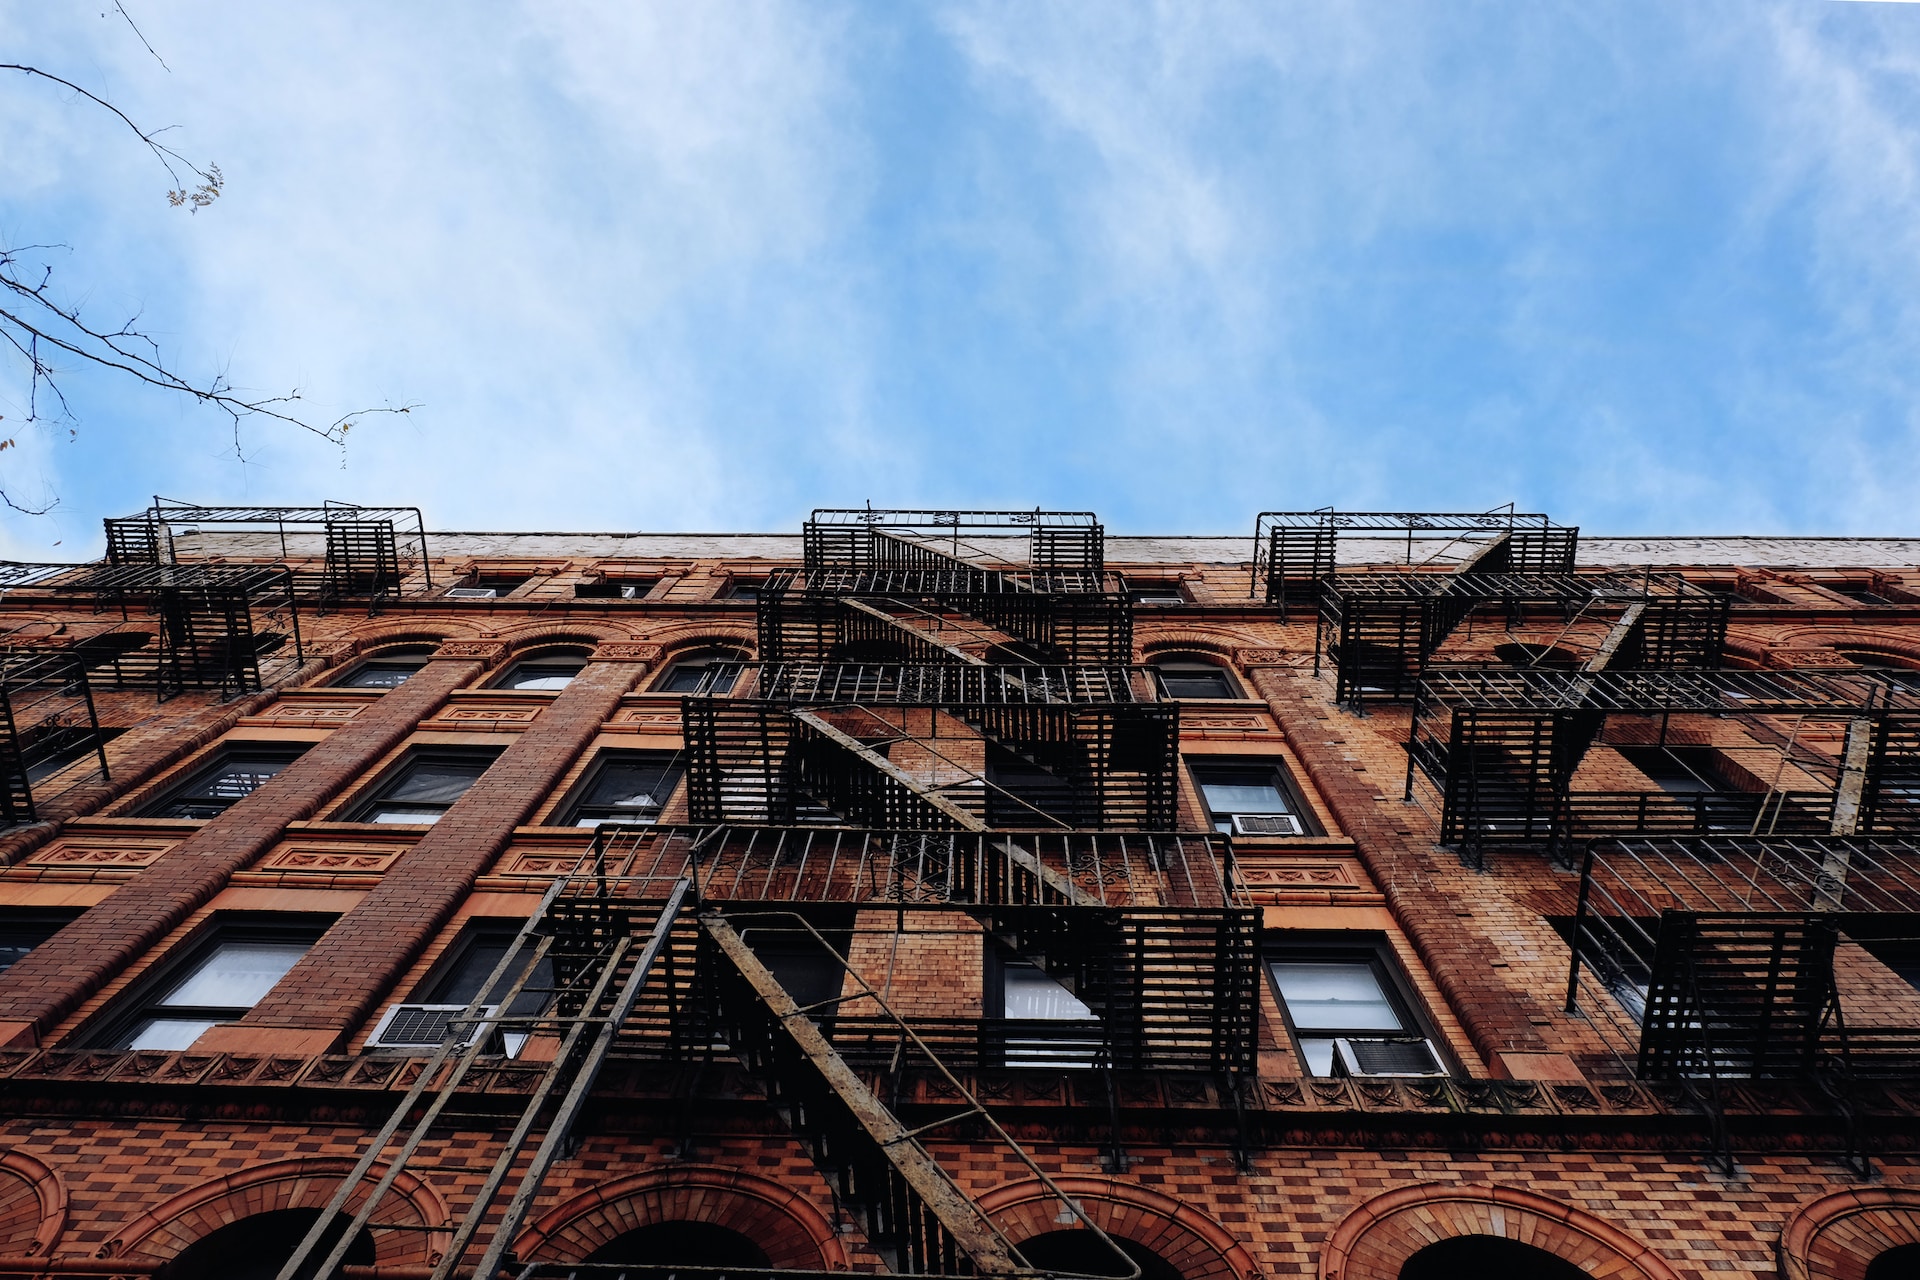 A view from the ground of a red brick apartment in New York, with iron fire escapes and the blue sky